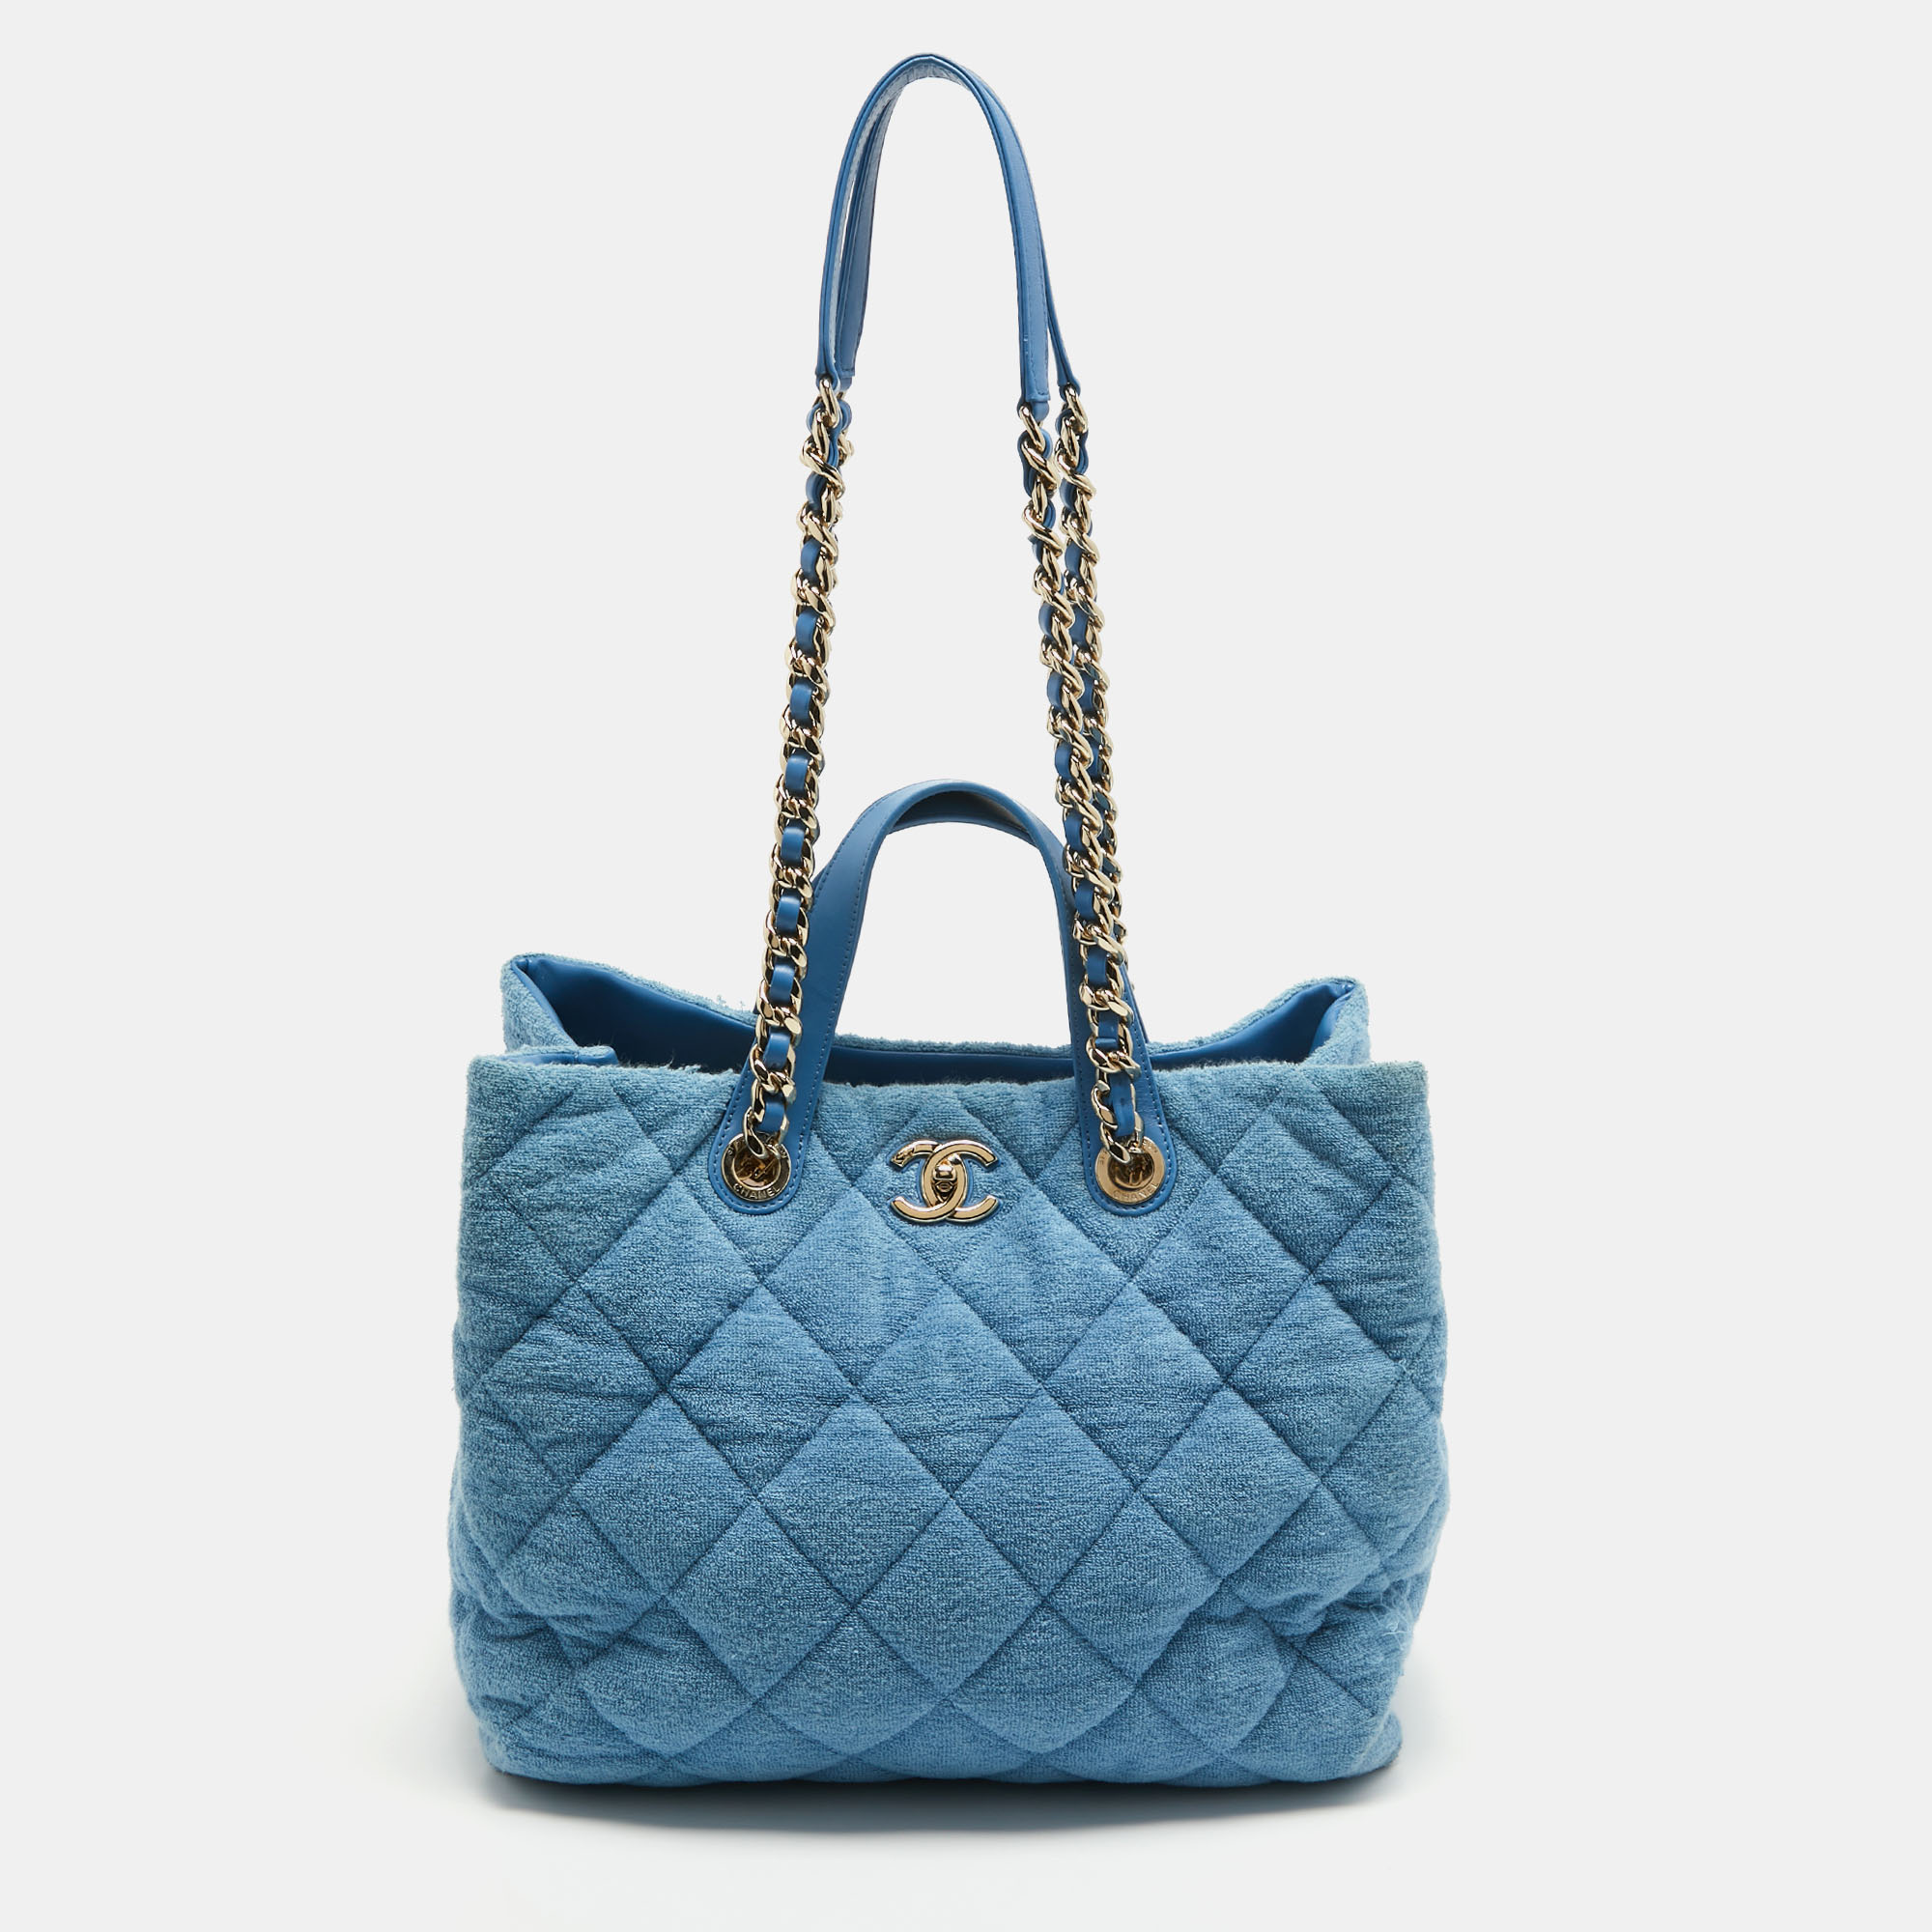 Pre-owned Chanel Light Blue Quilted Terry Cloth Coco Beach Shopper Tote